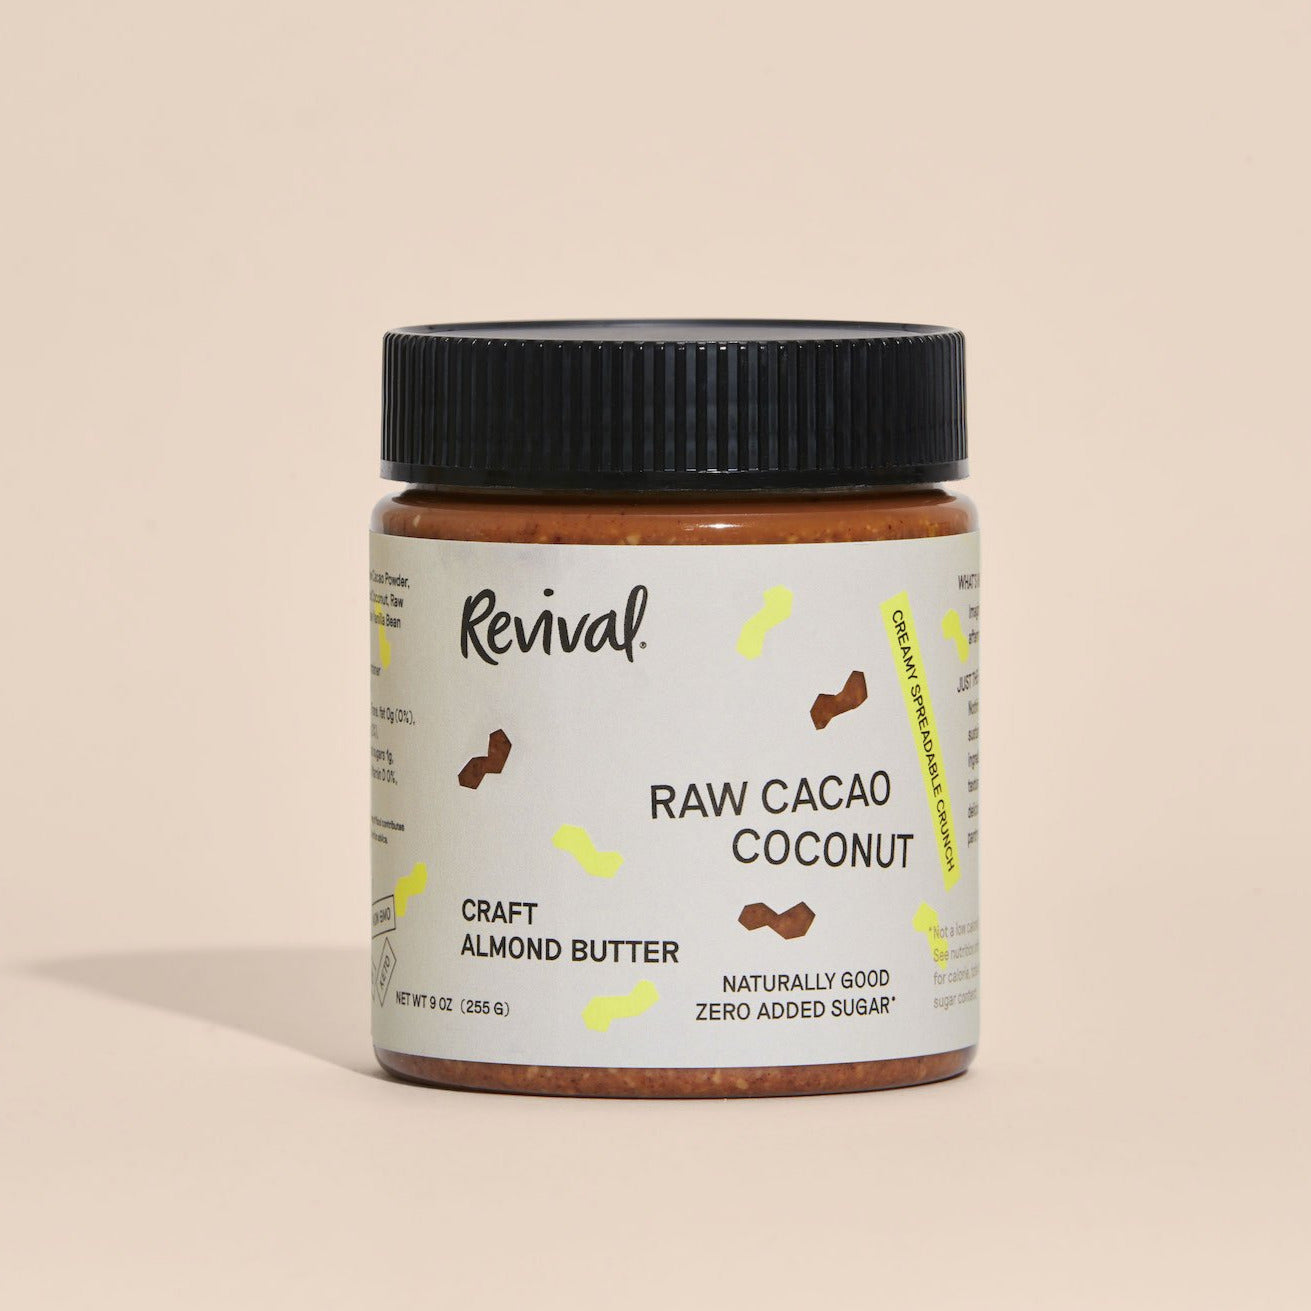 Raw Cacao Coconut by Revival Food